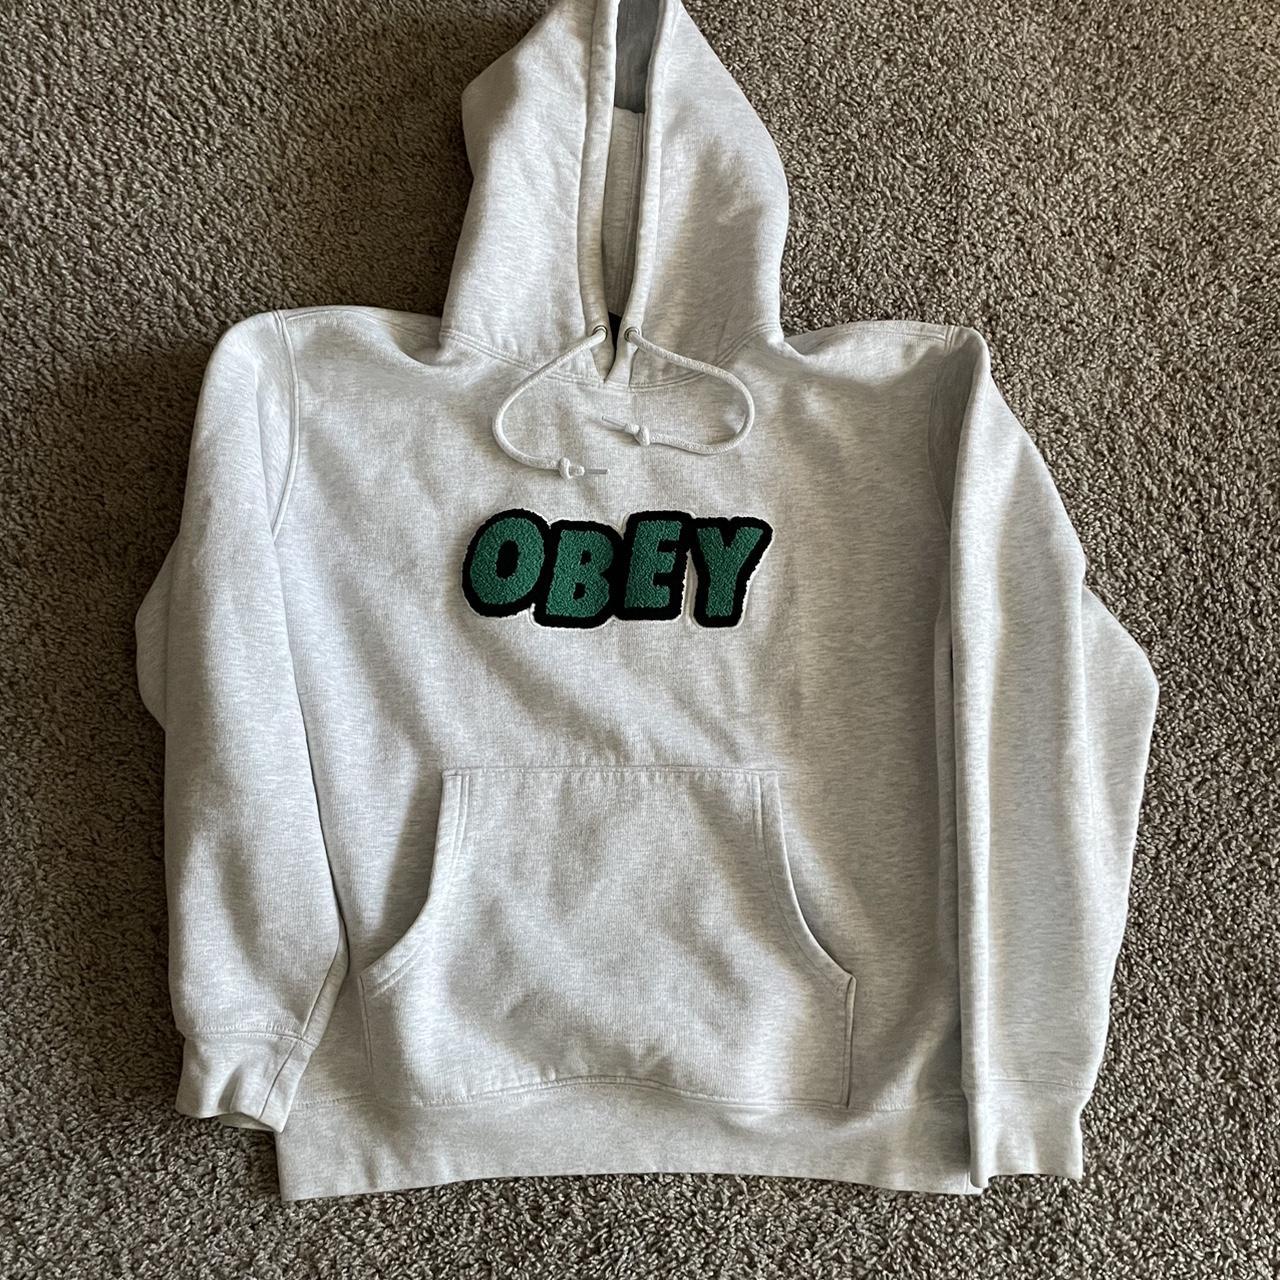 Obey Men's Grey and Green Hoodie